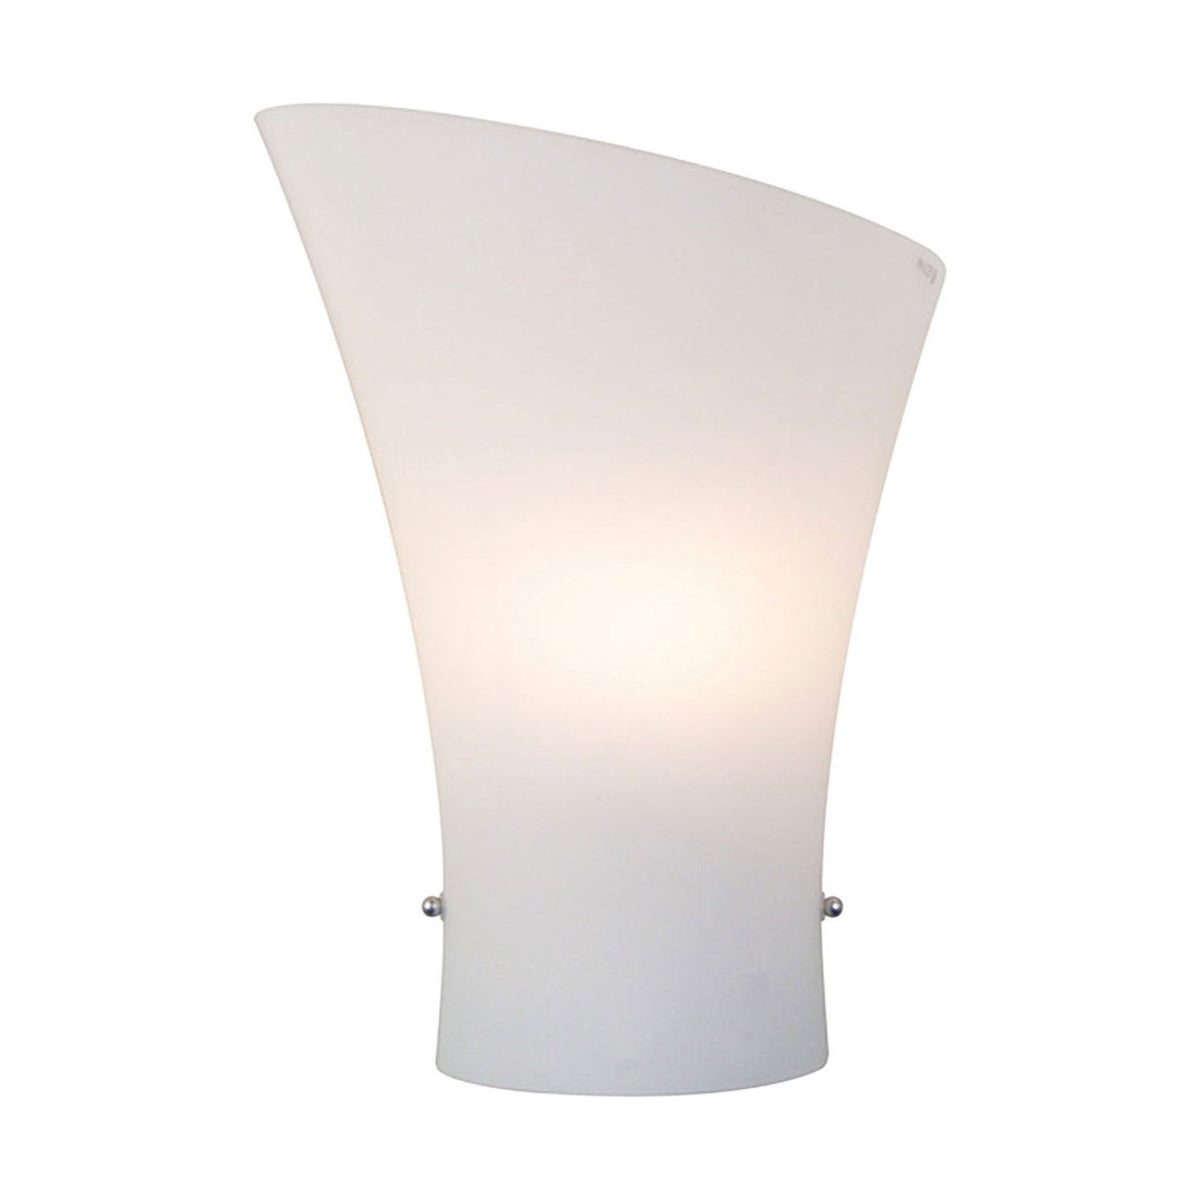 ET2 - E20413-09 - One Light Wall Sconce - Conico - Satin Nickel